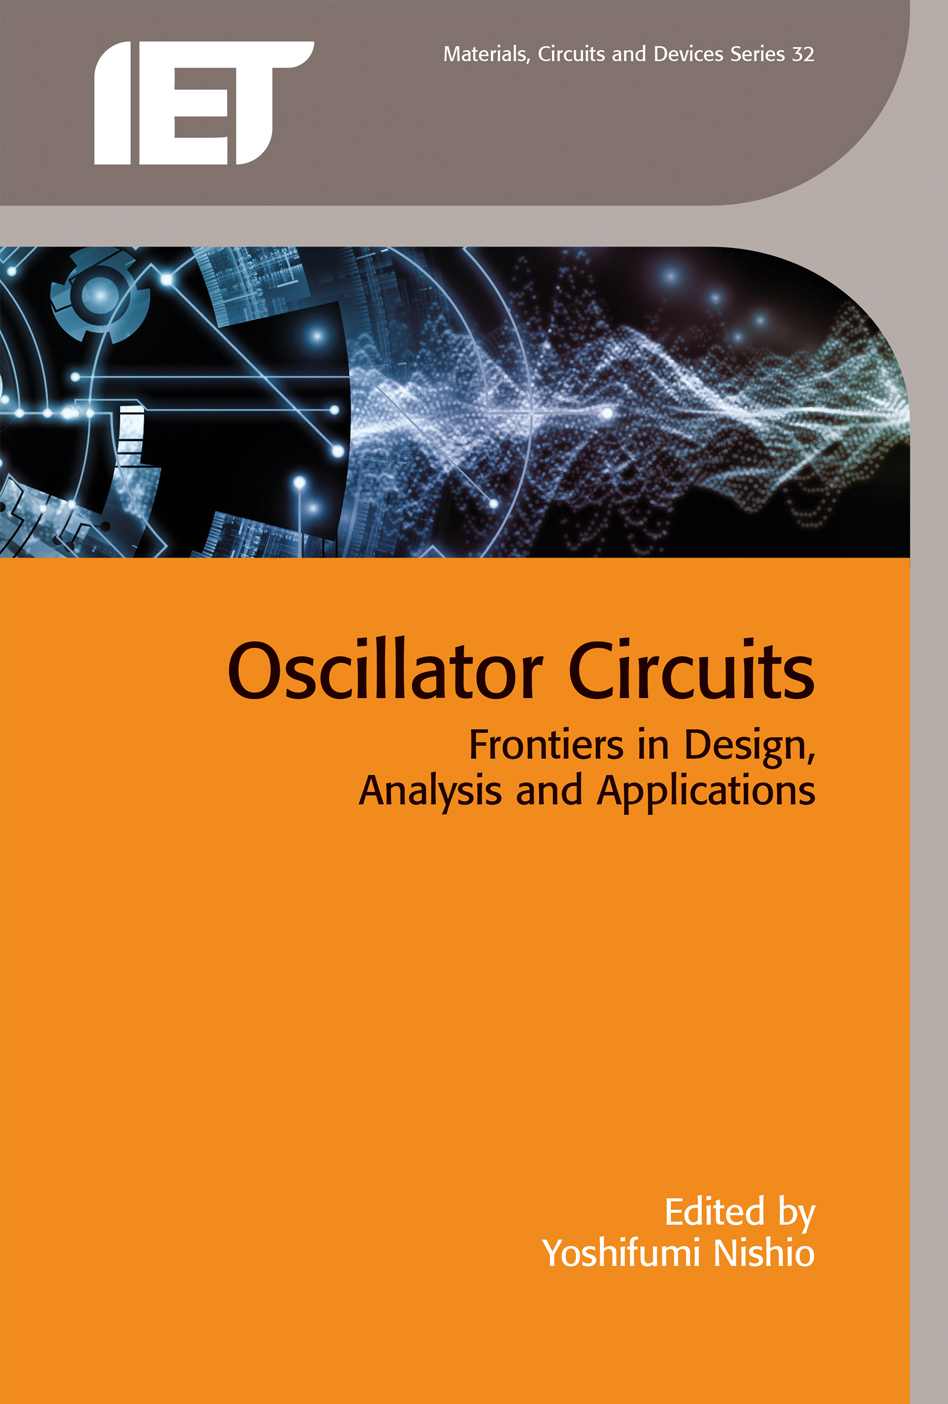 Oscillator Circuits, Frontiers in design, analysis and applications